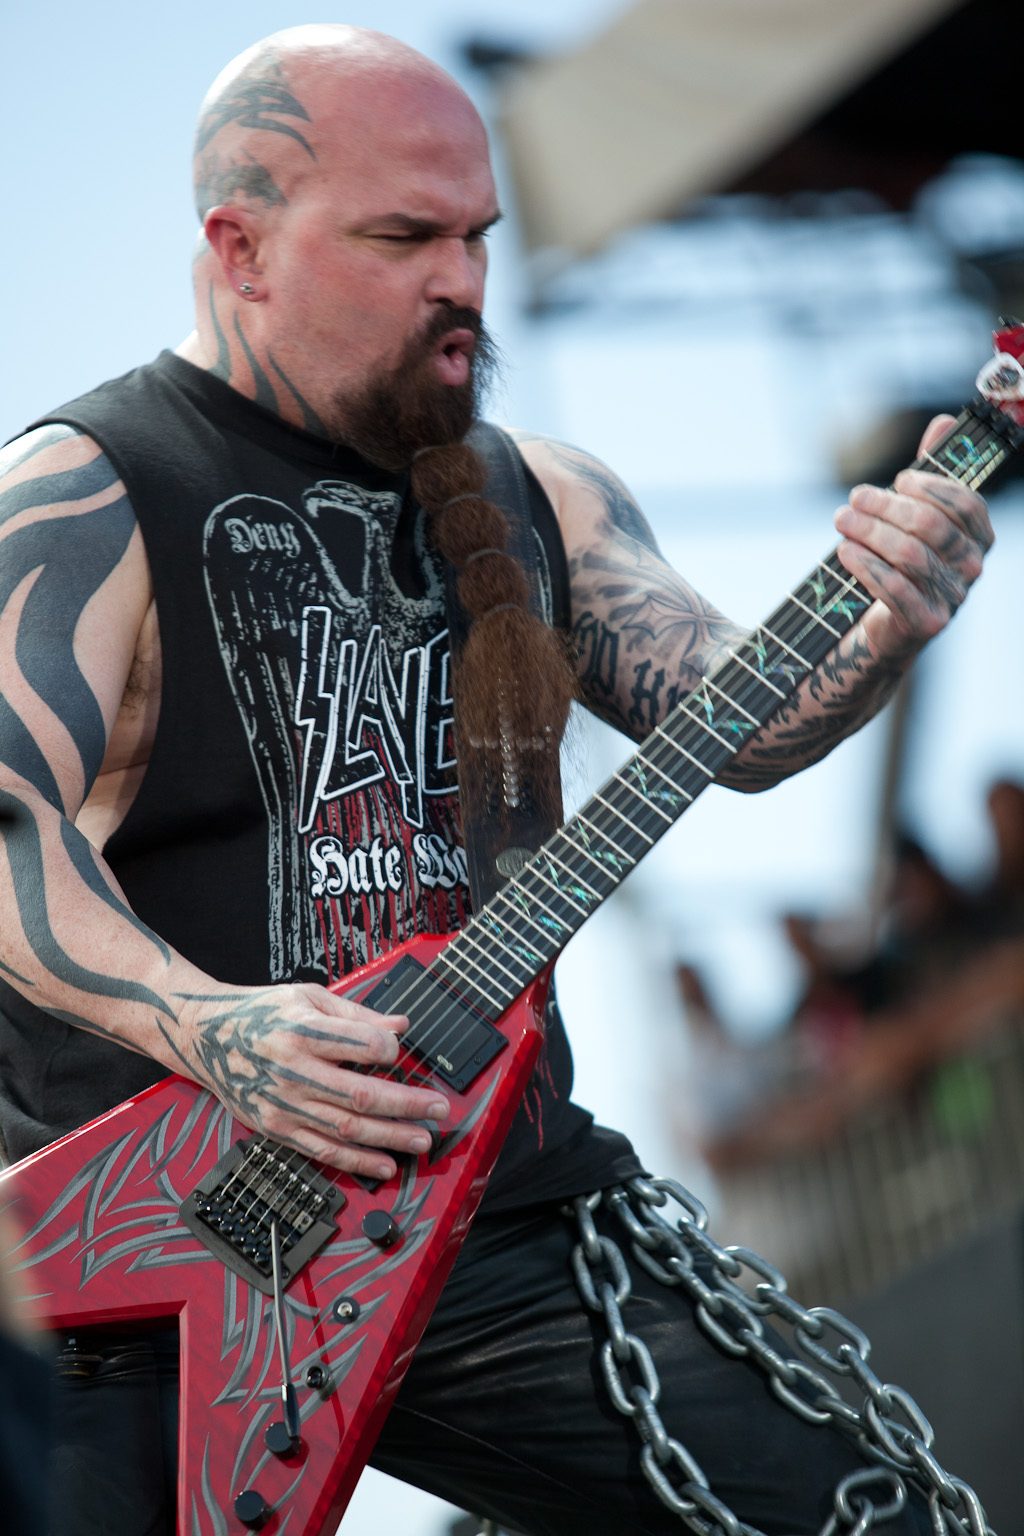 Kerry King Discusses Anger Over Slayer’s “Premature” Retirement